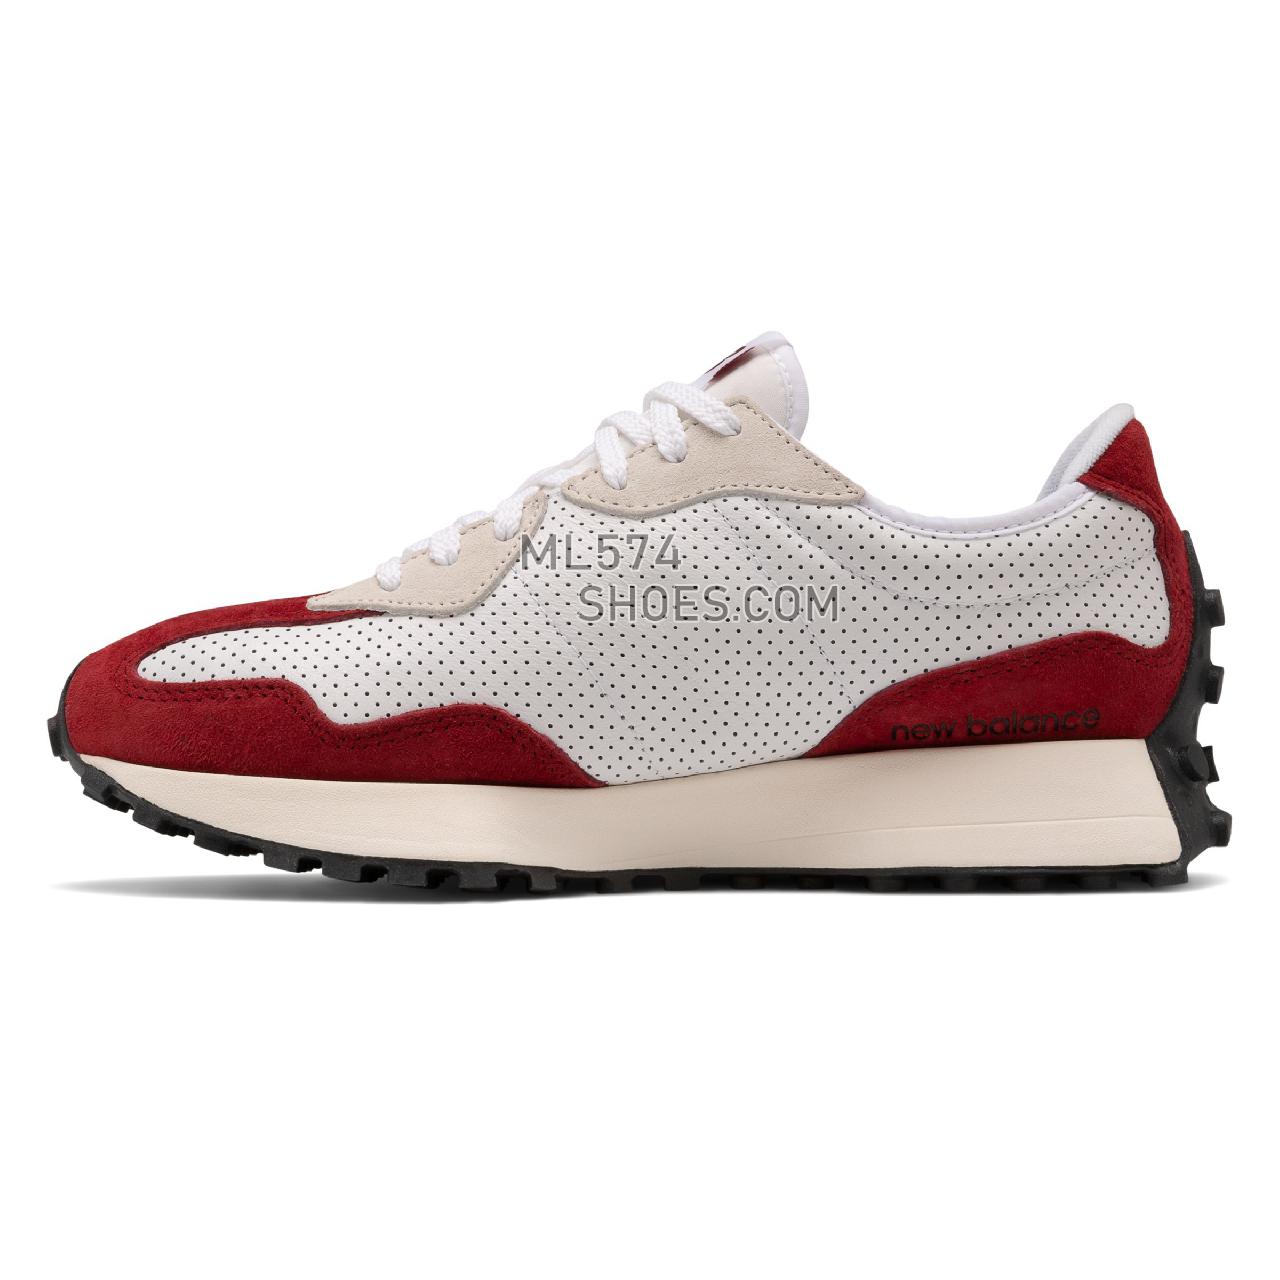 New Balance 327 - Unisex Men's Women's Sport Style Sneakers - White with Nb Scarlet - MS327PE